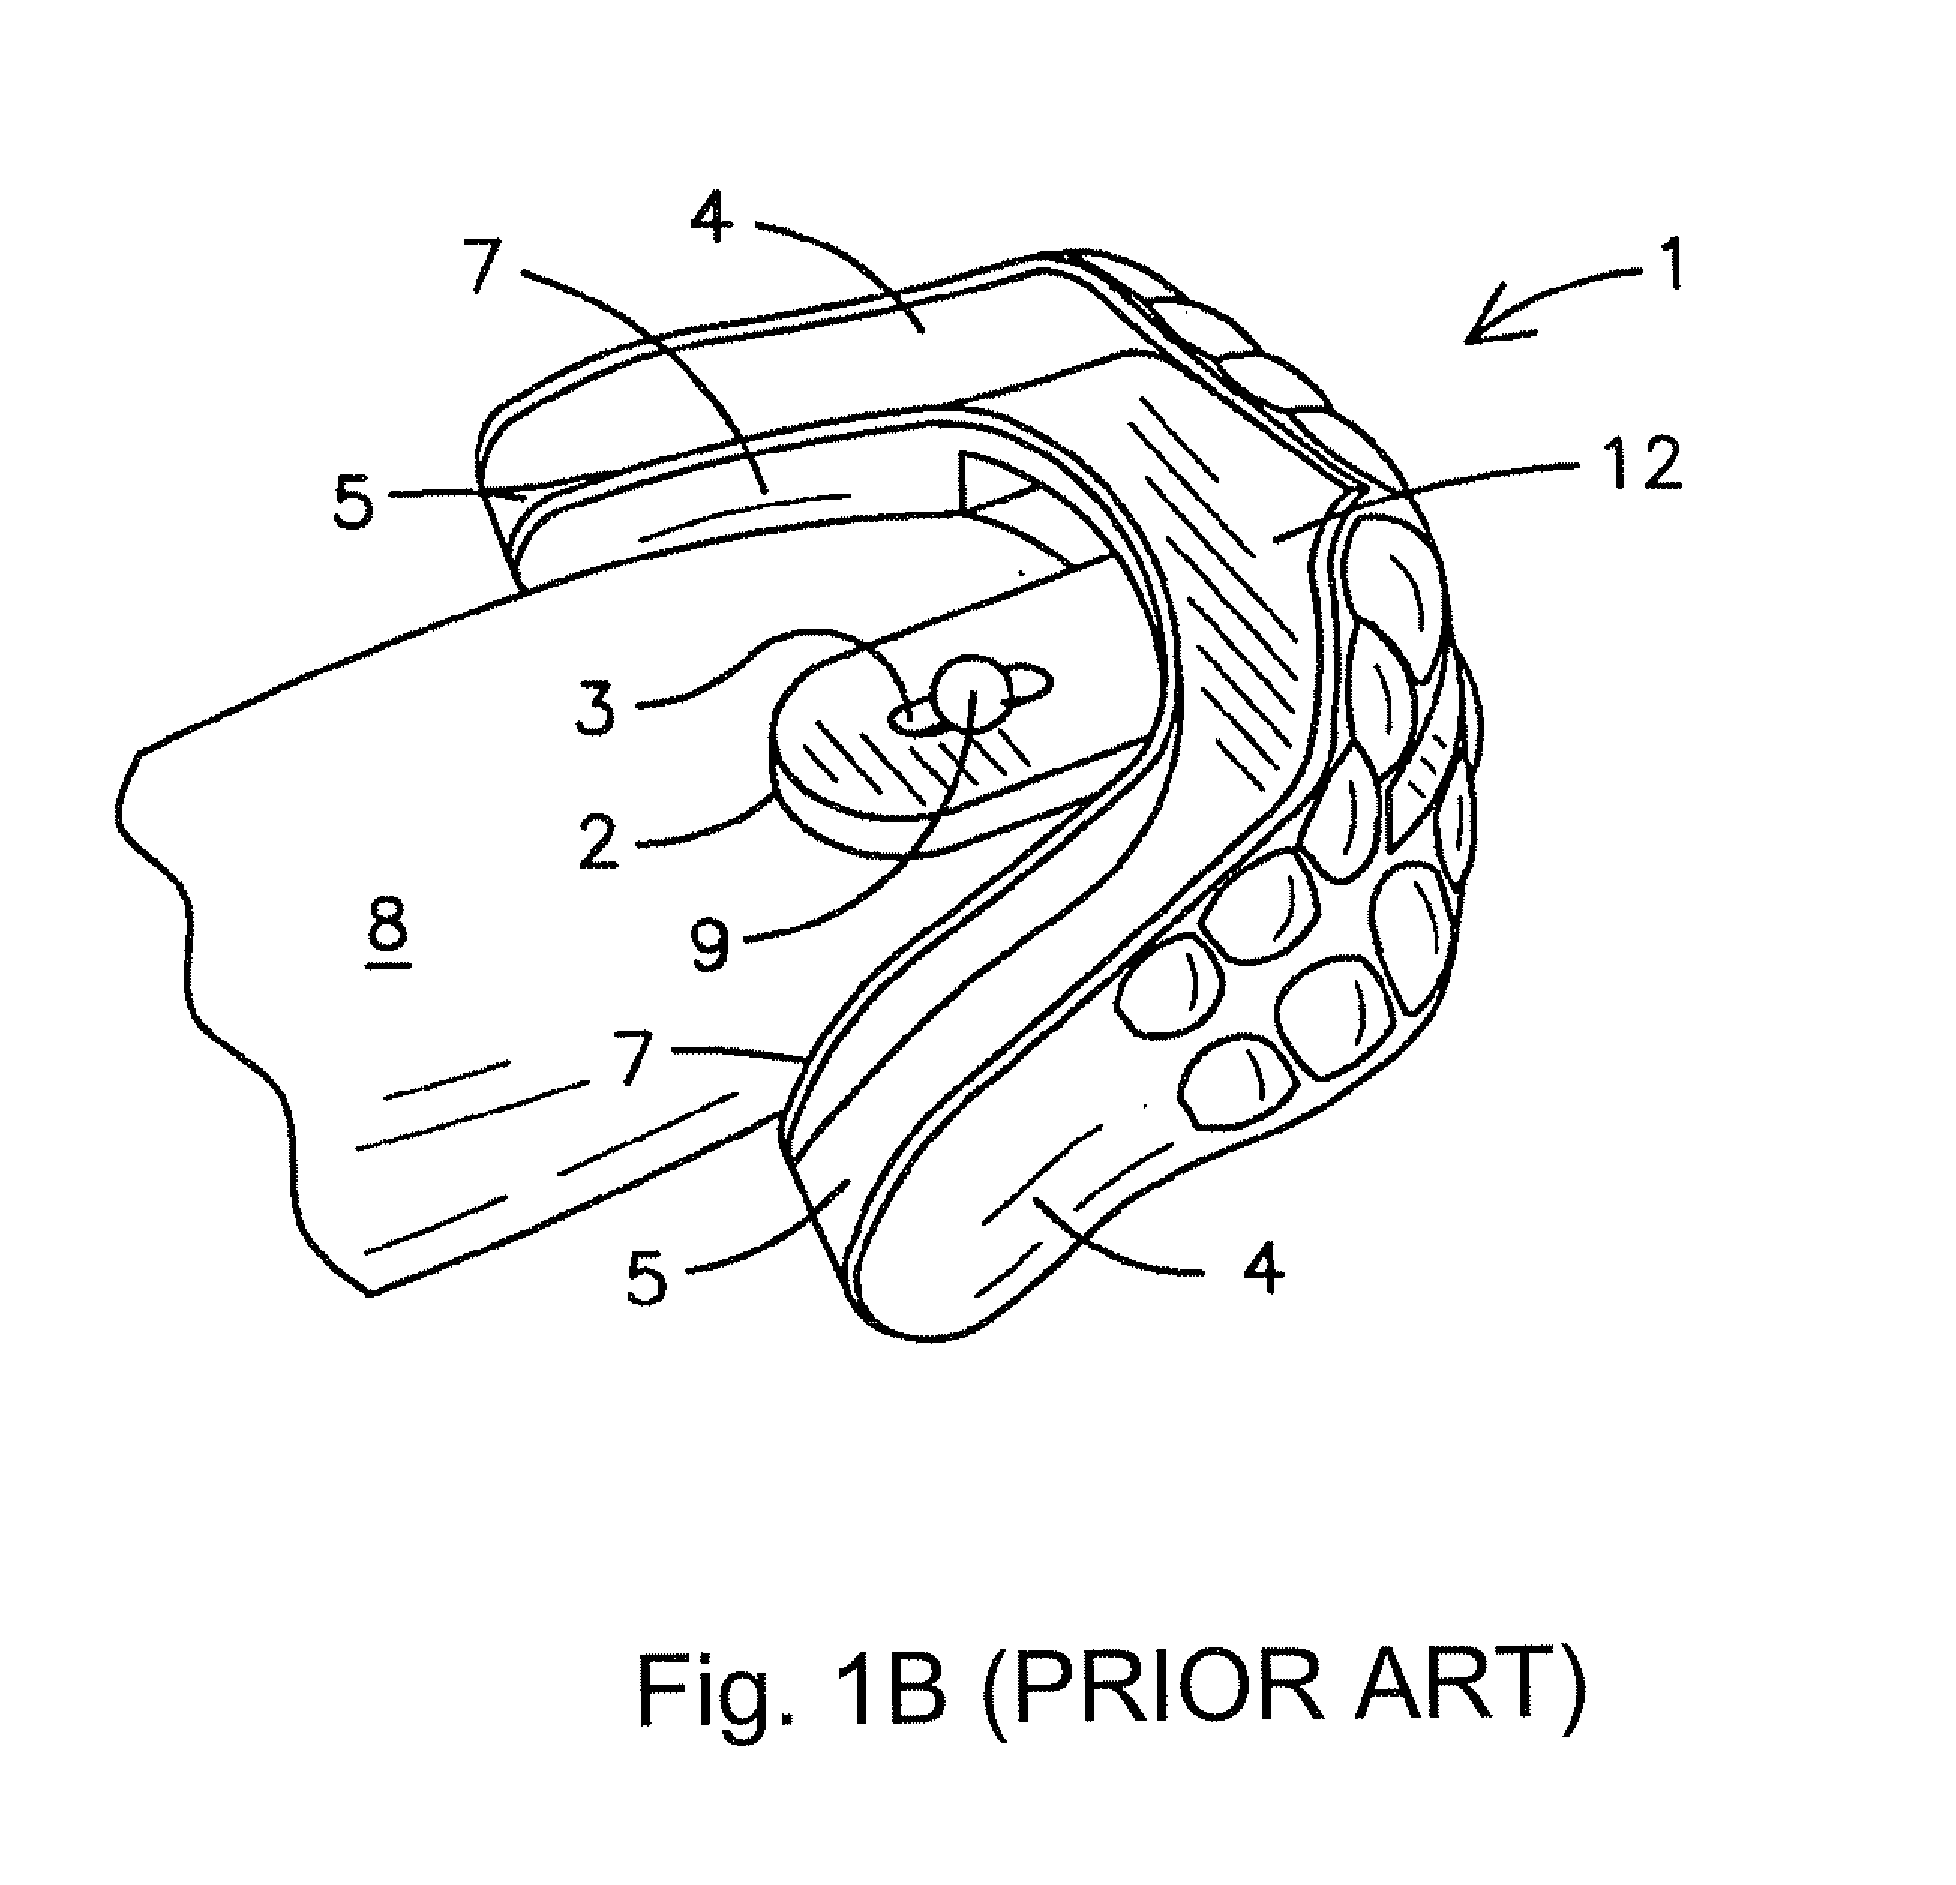 Oral tongue positioning device